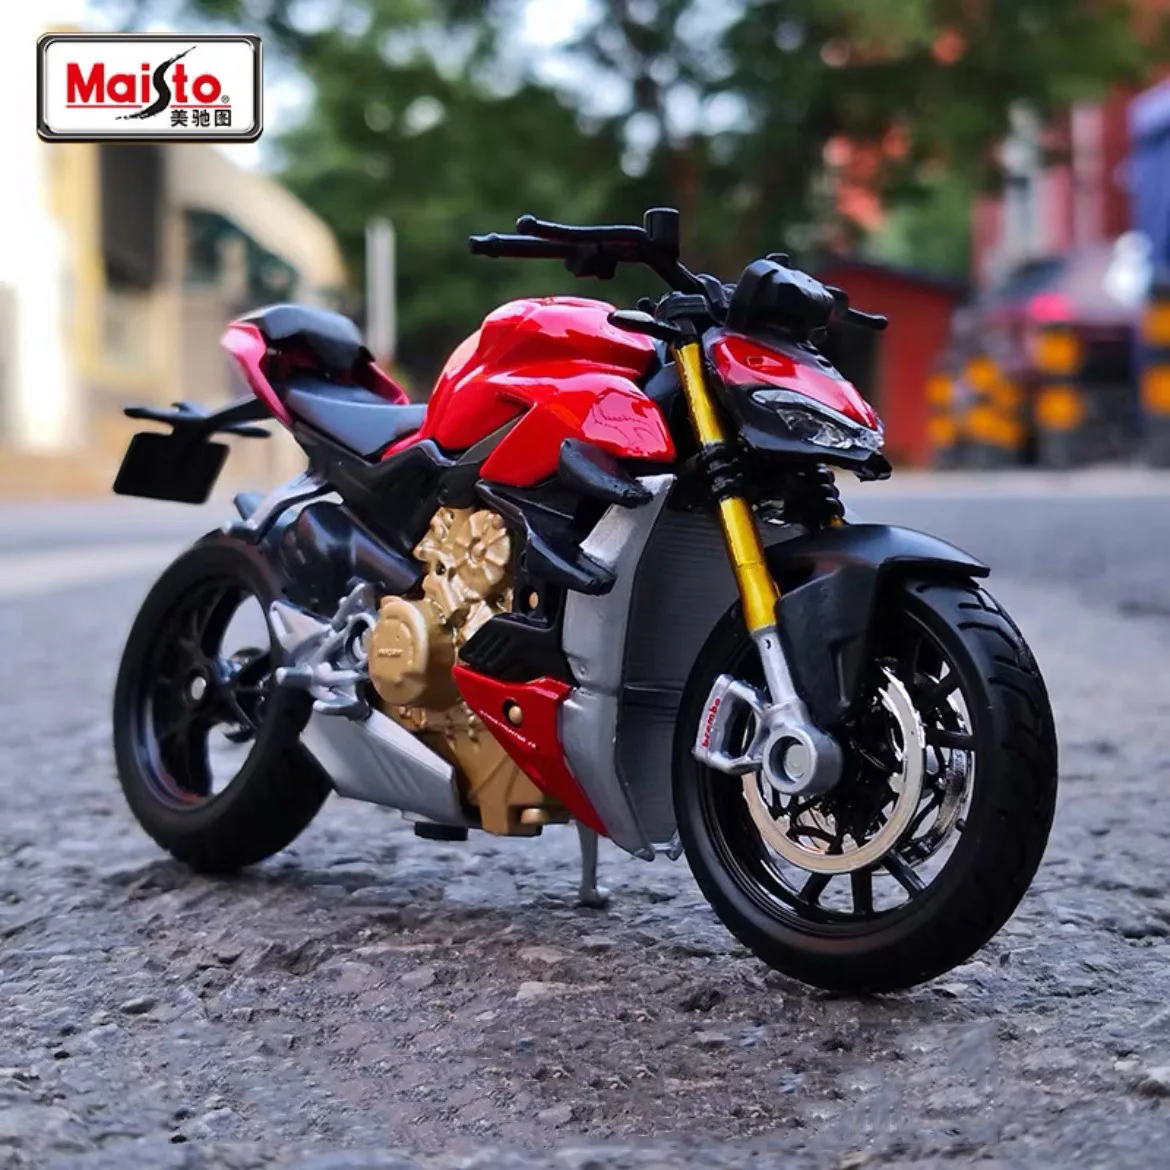 

Maisto 1:18 DUCATI Super Naked V4S Alloy Toy Motorcycle Model Simulation Diecast Metal Motorcycle Model Collection Children Gift